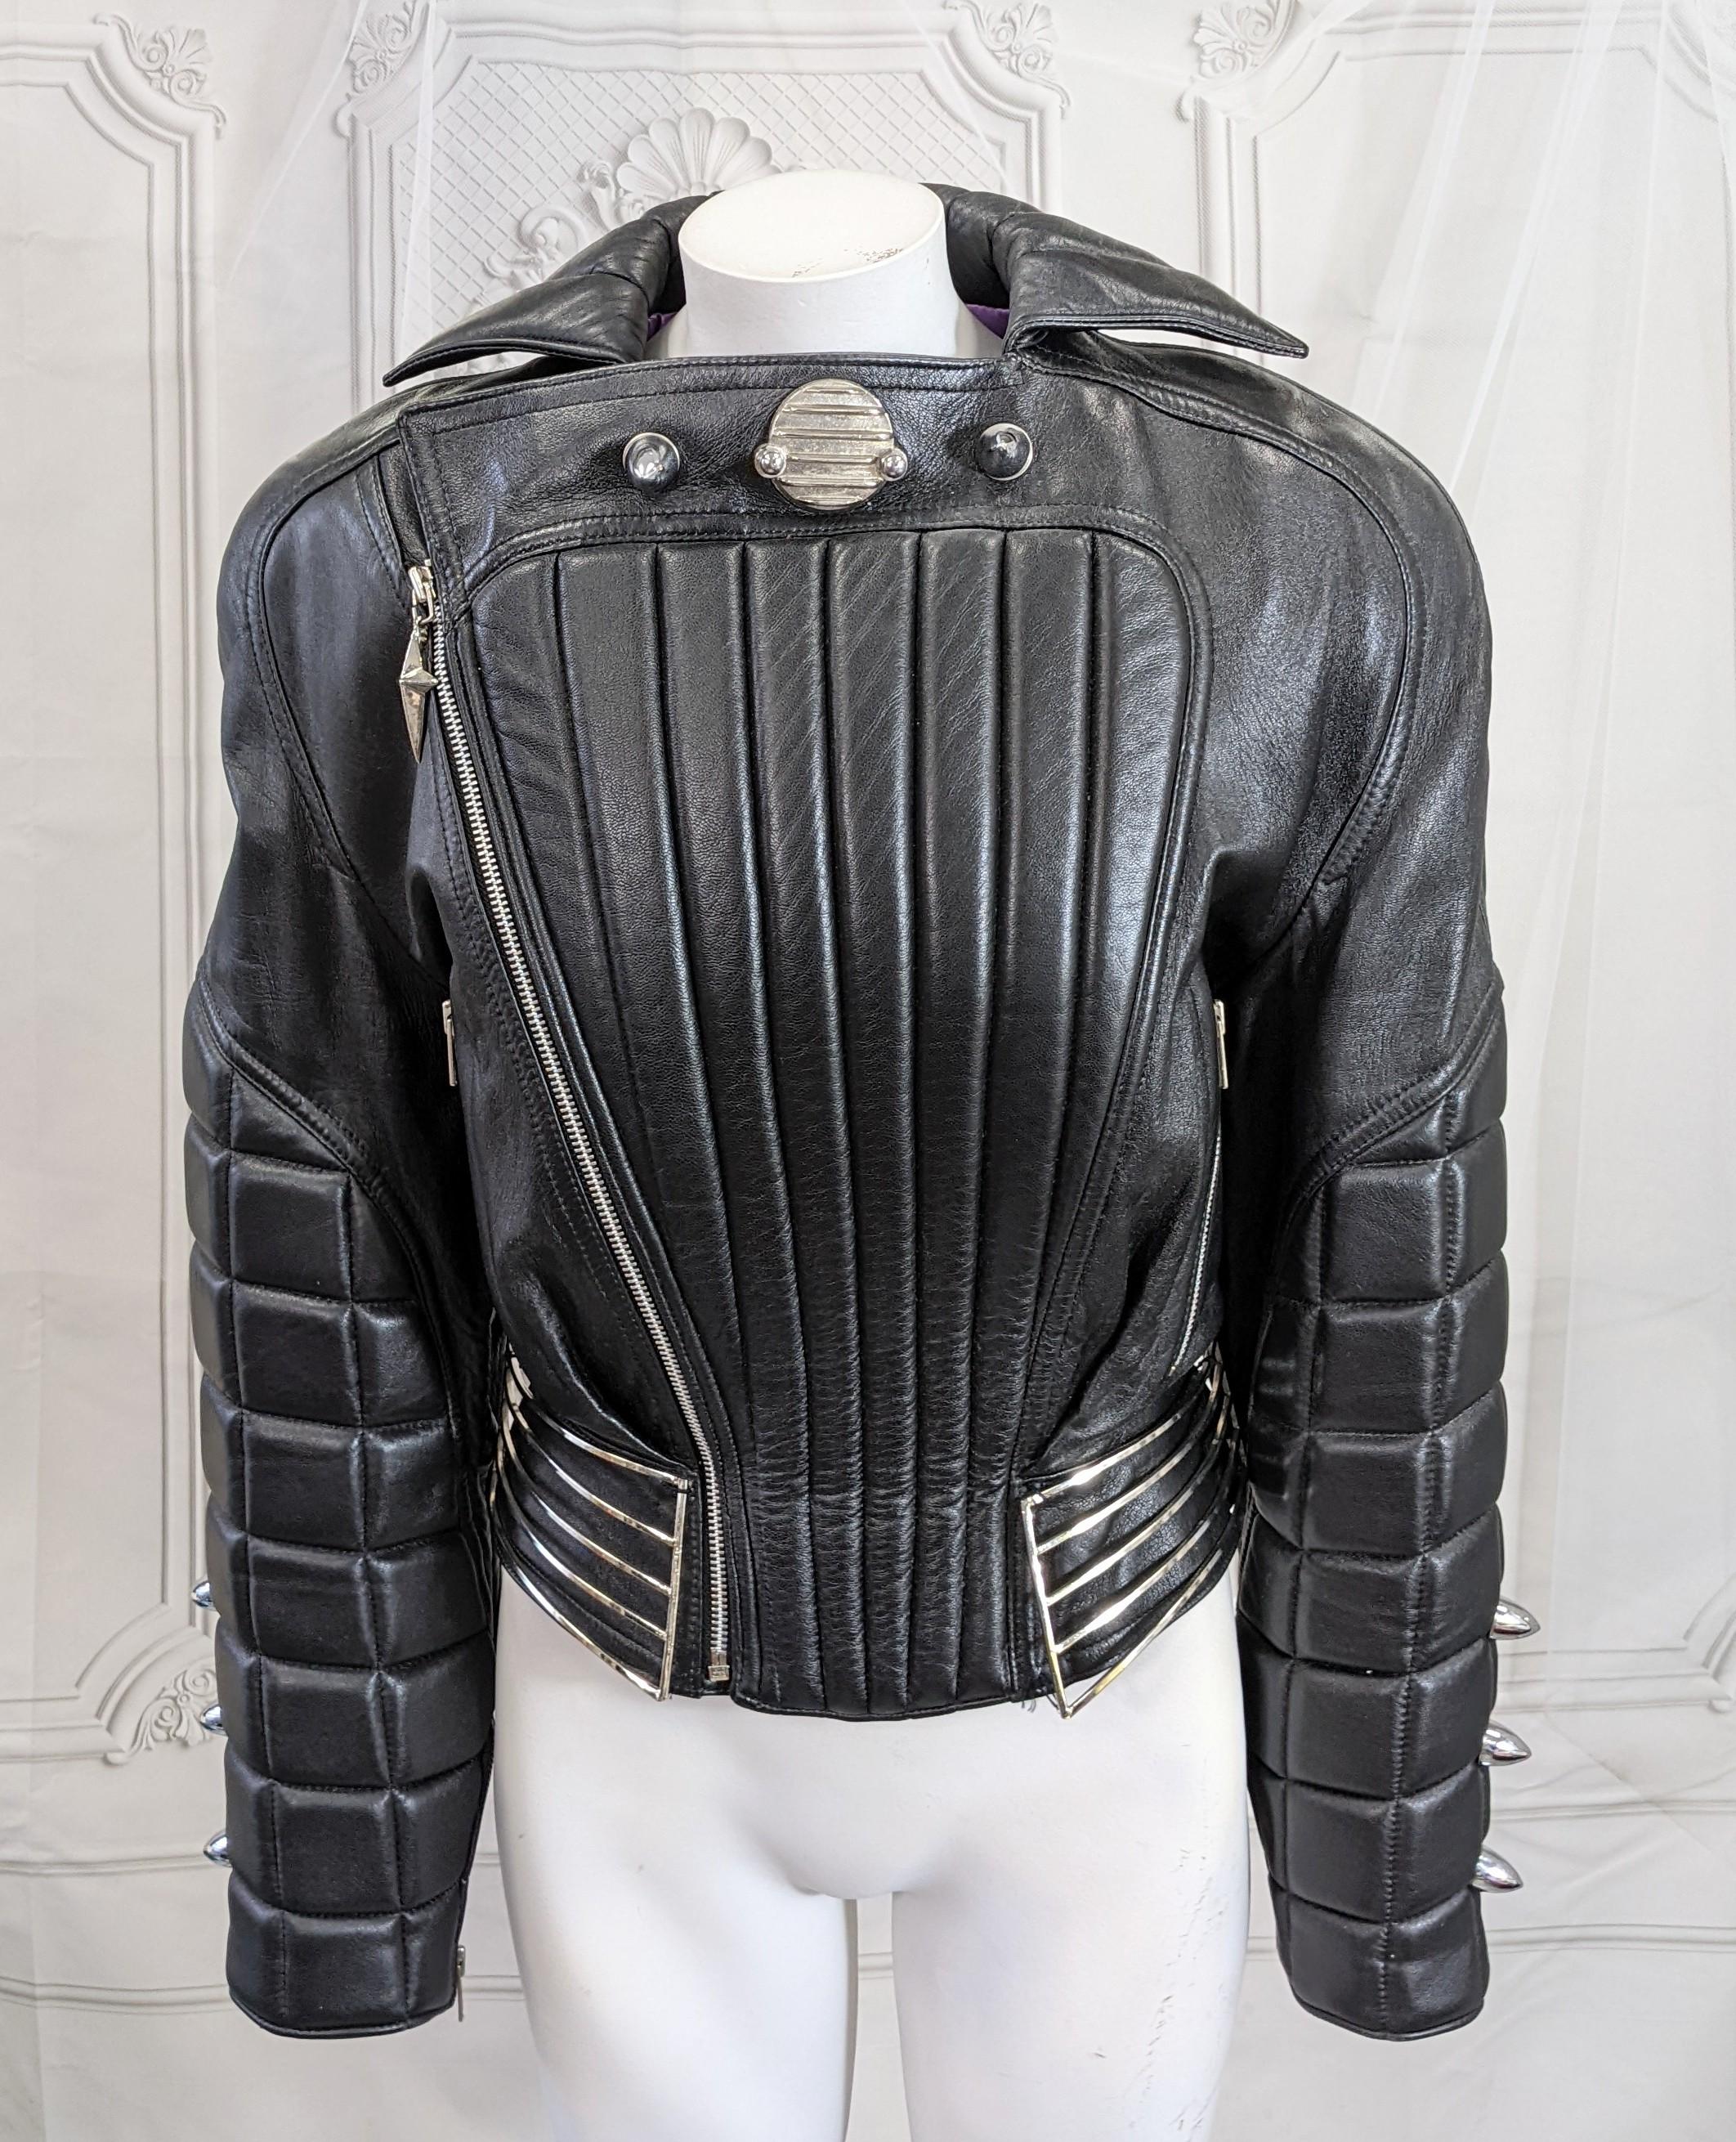  Thierry Mugler Cadillac Grill Padded Motorcycle Jacket, 1989 F/W 1